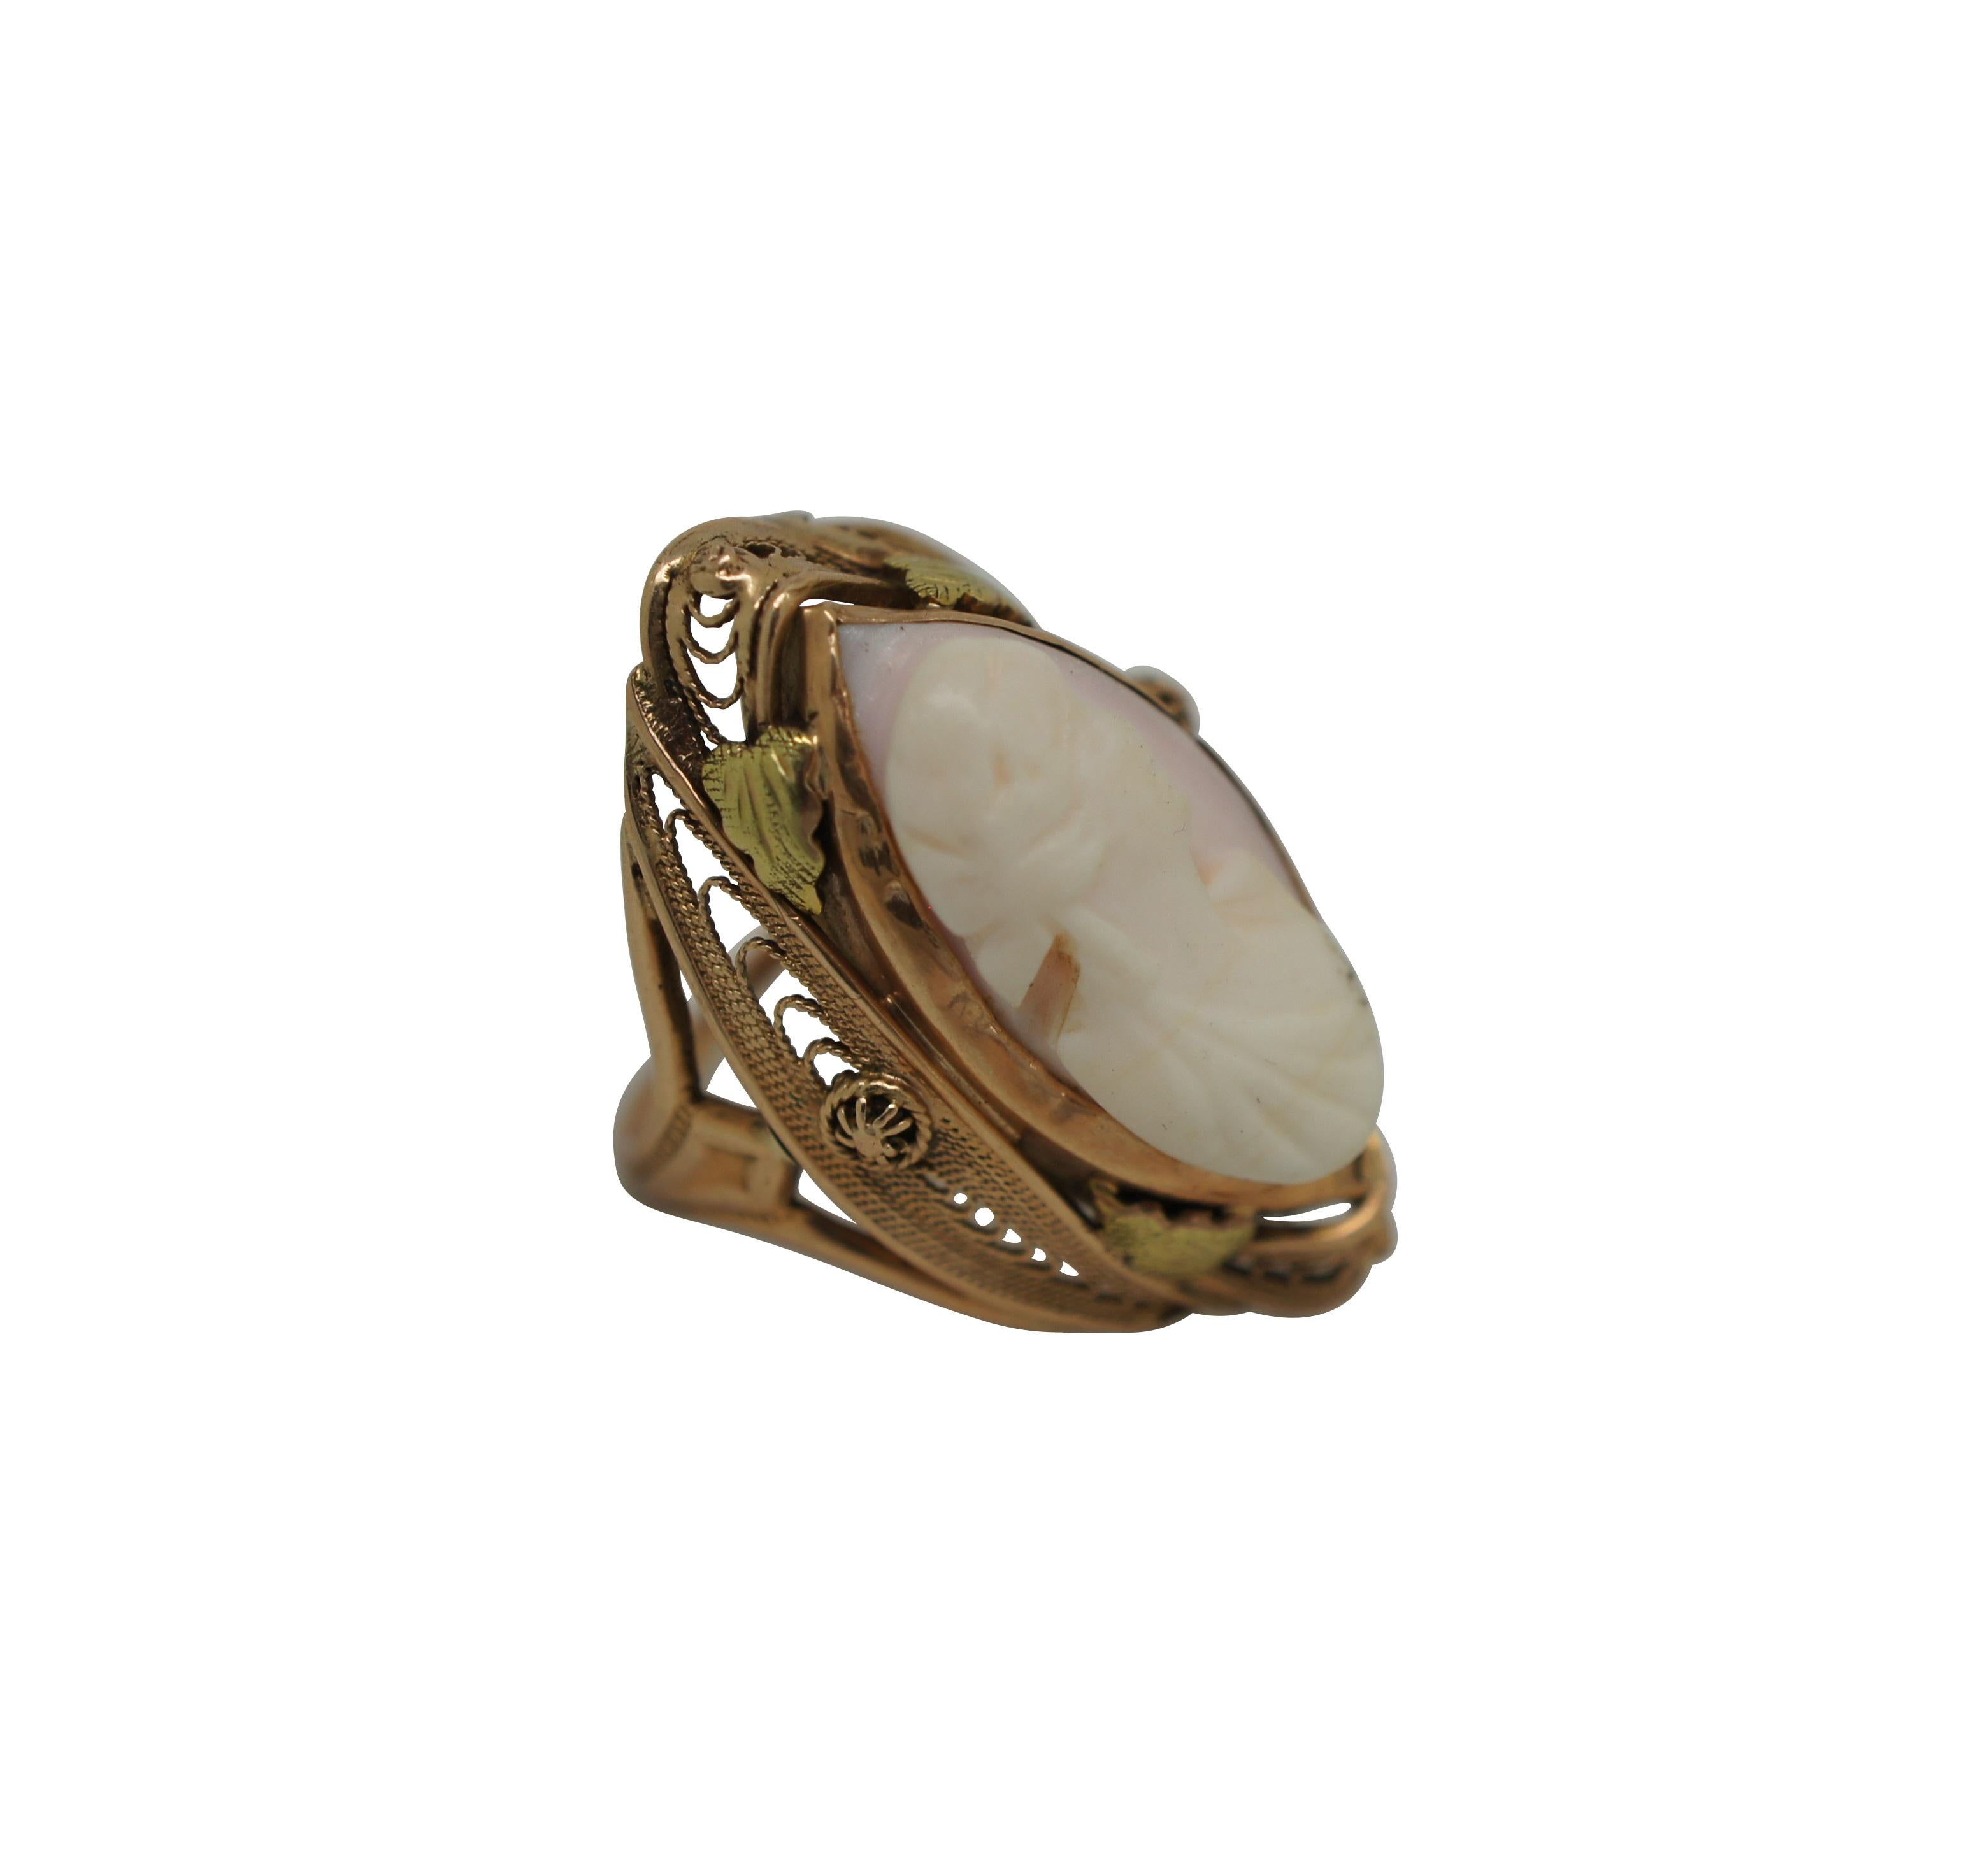 Antique late Victorian / Art Nouveau 10k yellow gold ring featuring a marquise shaped filigree setting accented with leaves and a pale pink, hand carved shell cameo showing a neoclassical female bust.

Dimensions:
0.75” x 1.125” x 0.875” (Width x